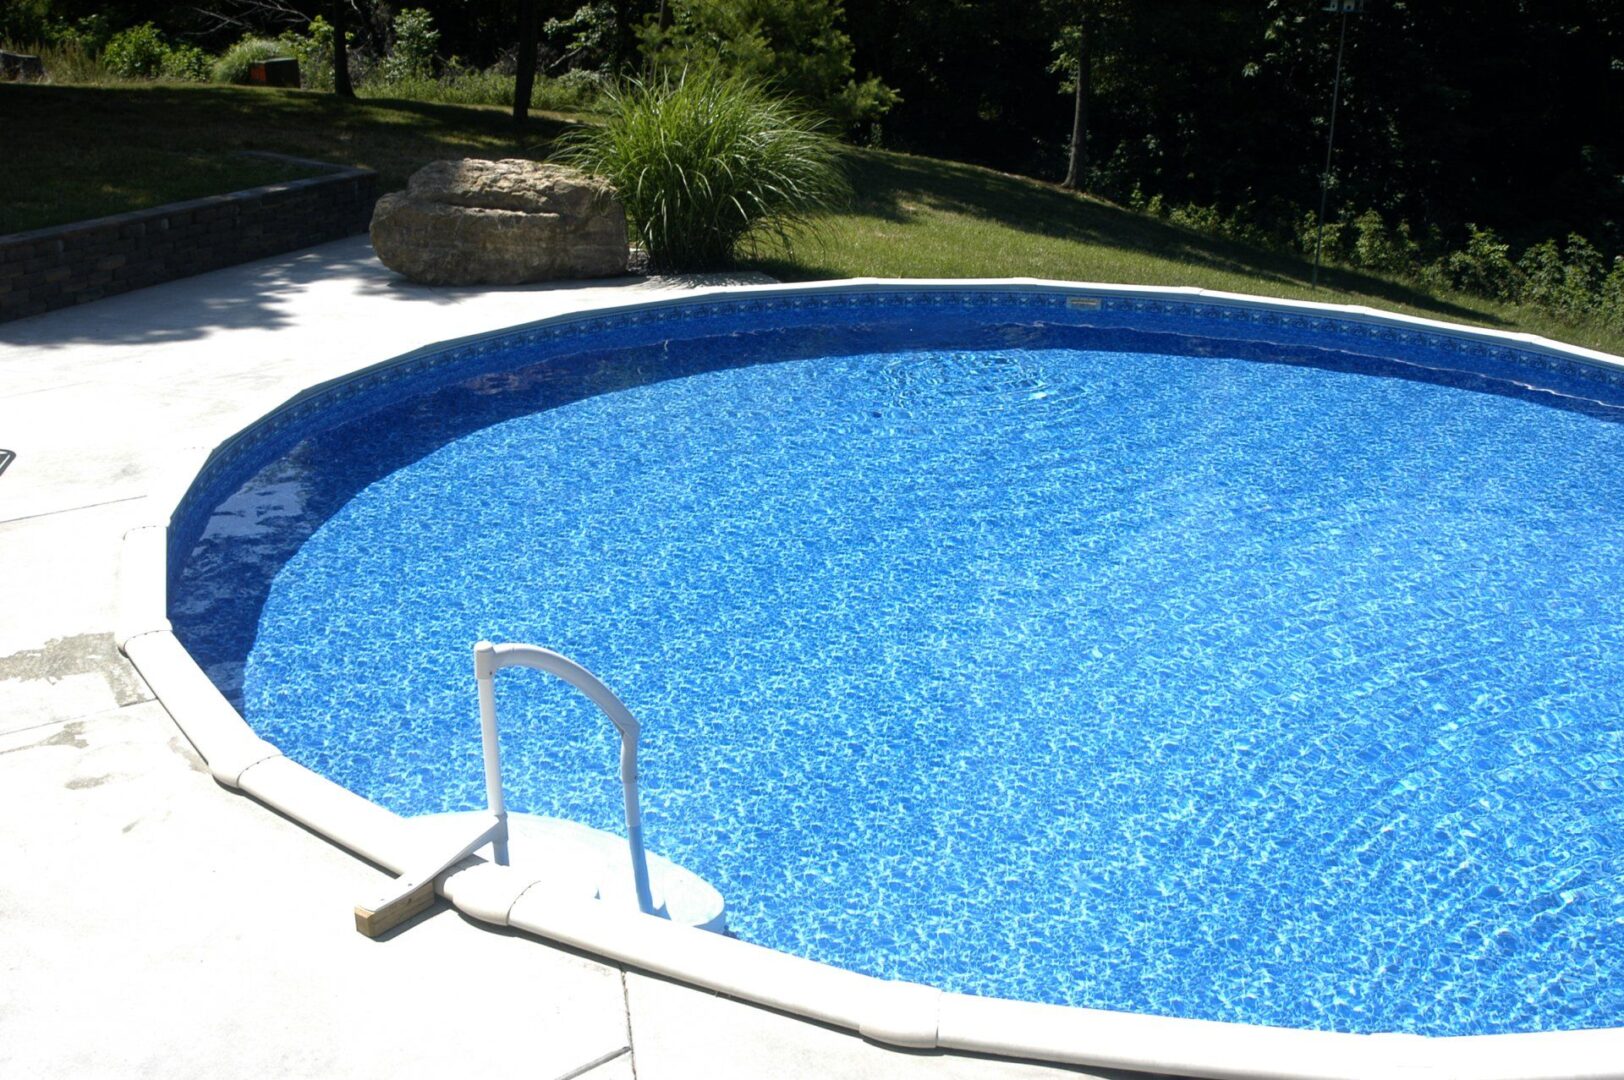 An image of a newly installed pool